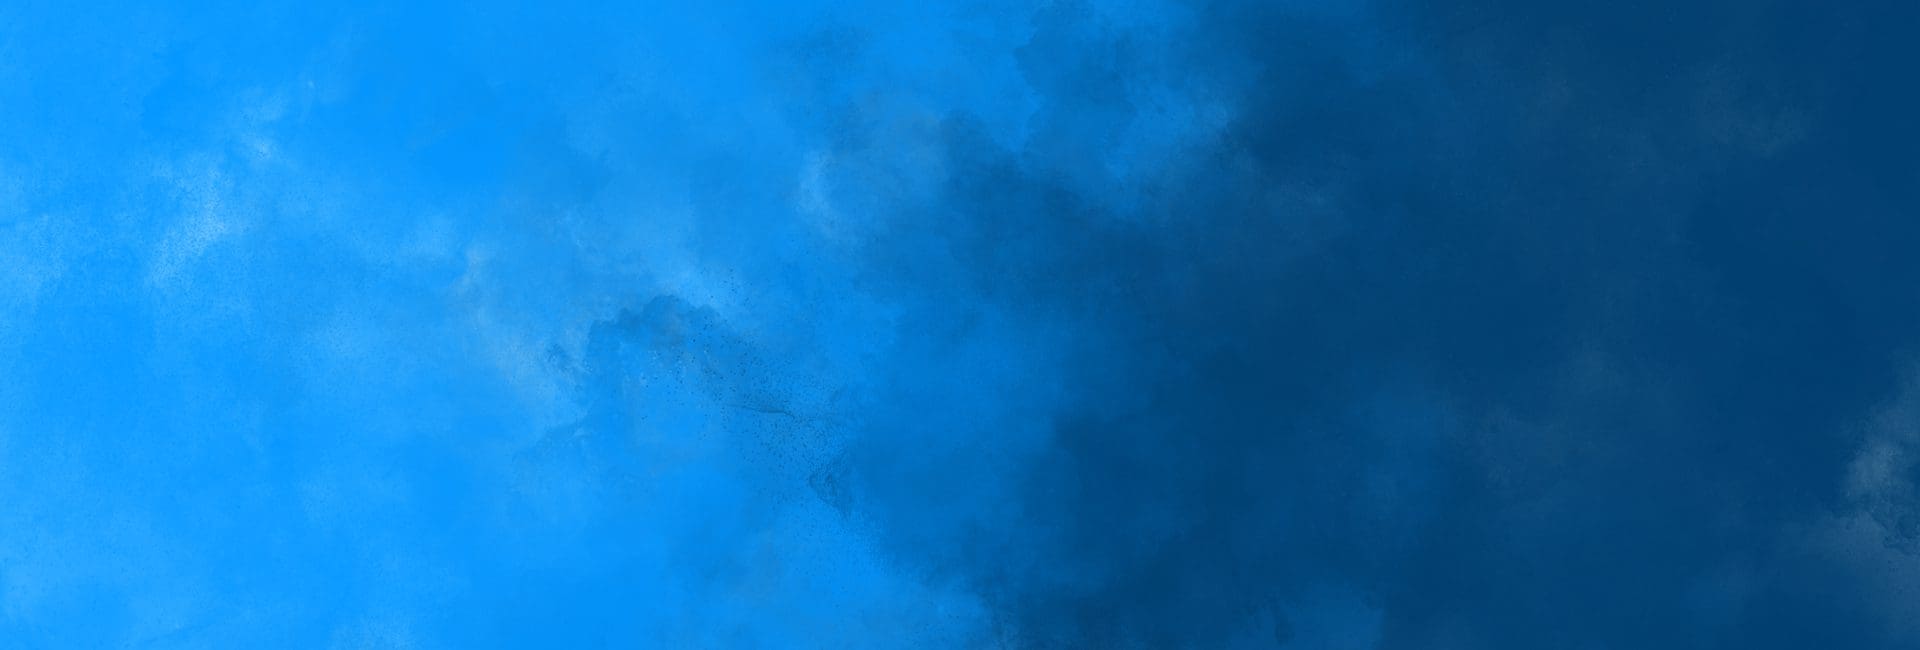 corporate-blue-texture-background-2